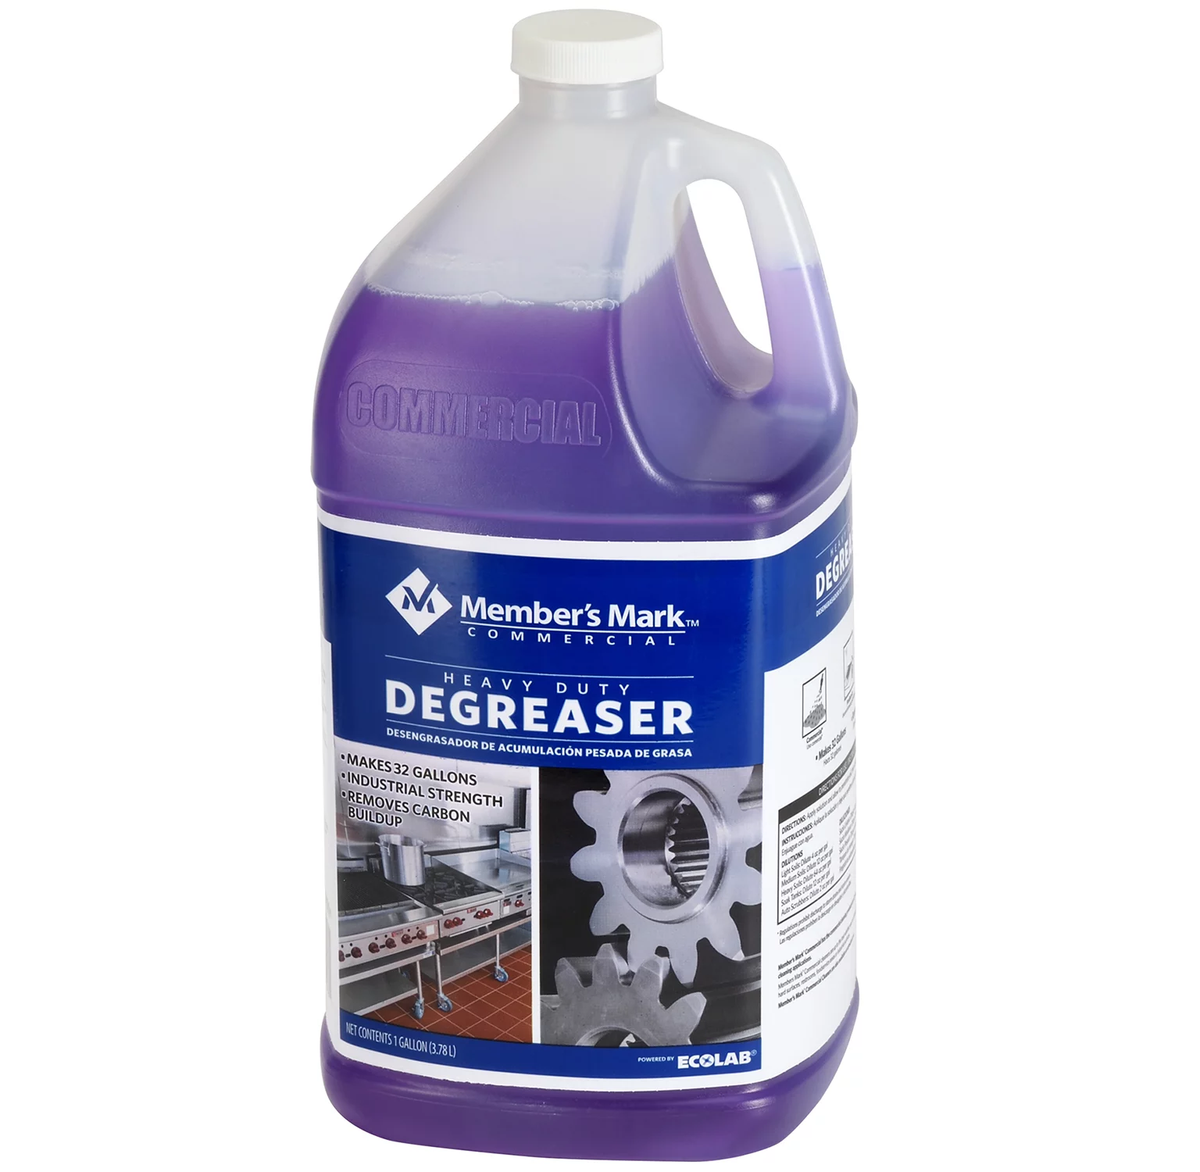 DU-MOST Heavy Duty Citrus Degreaser/Cleaner Concentrate, Industrial Grade,  Biodegradable, Kitchen/Floor Scrub, Engine/Parts Wash, Removes Grease,  Grime, Oil, Tar, Ink. Rubber Mark, Food Soil, 1 Gallon